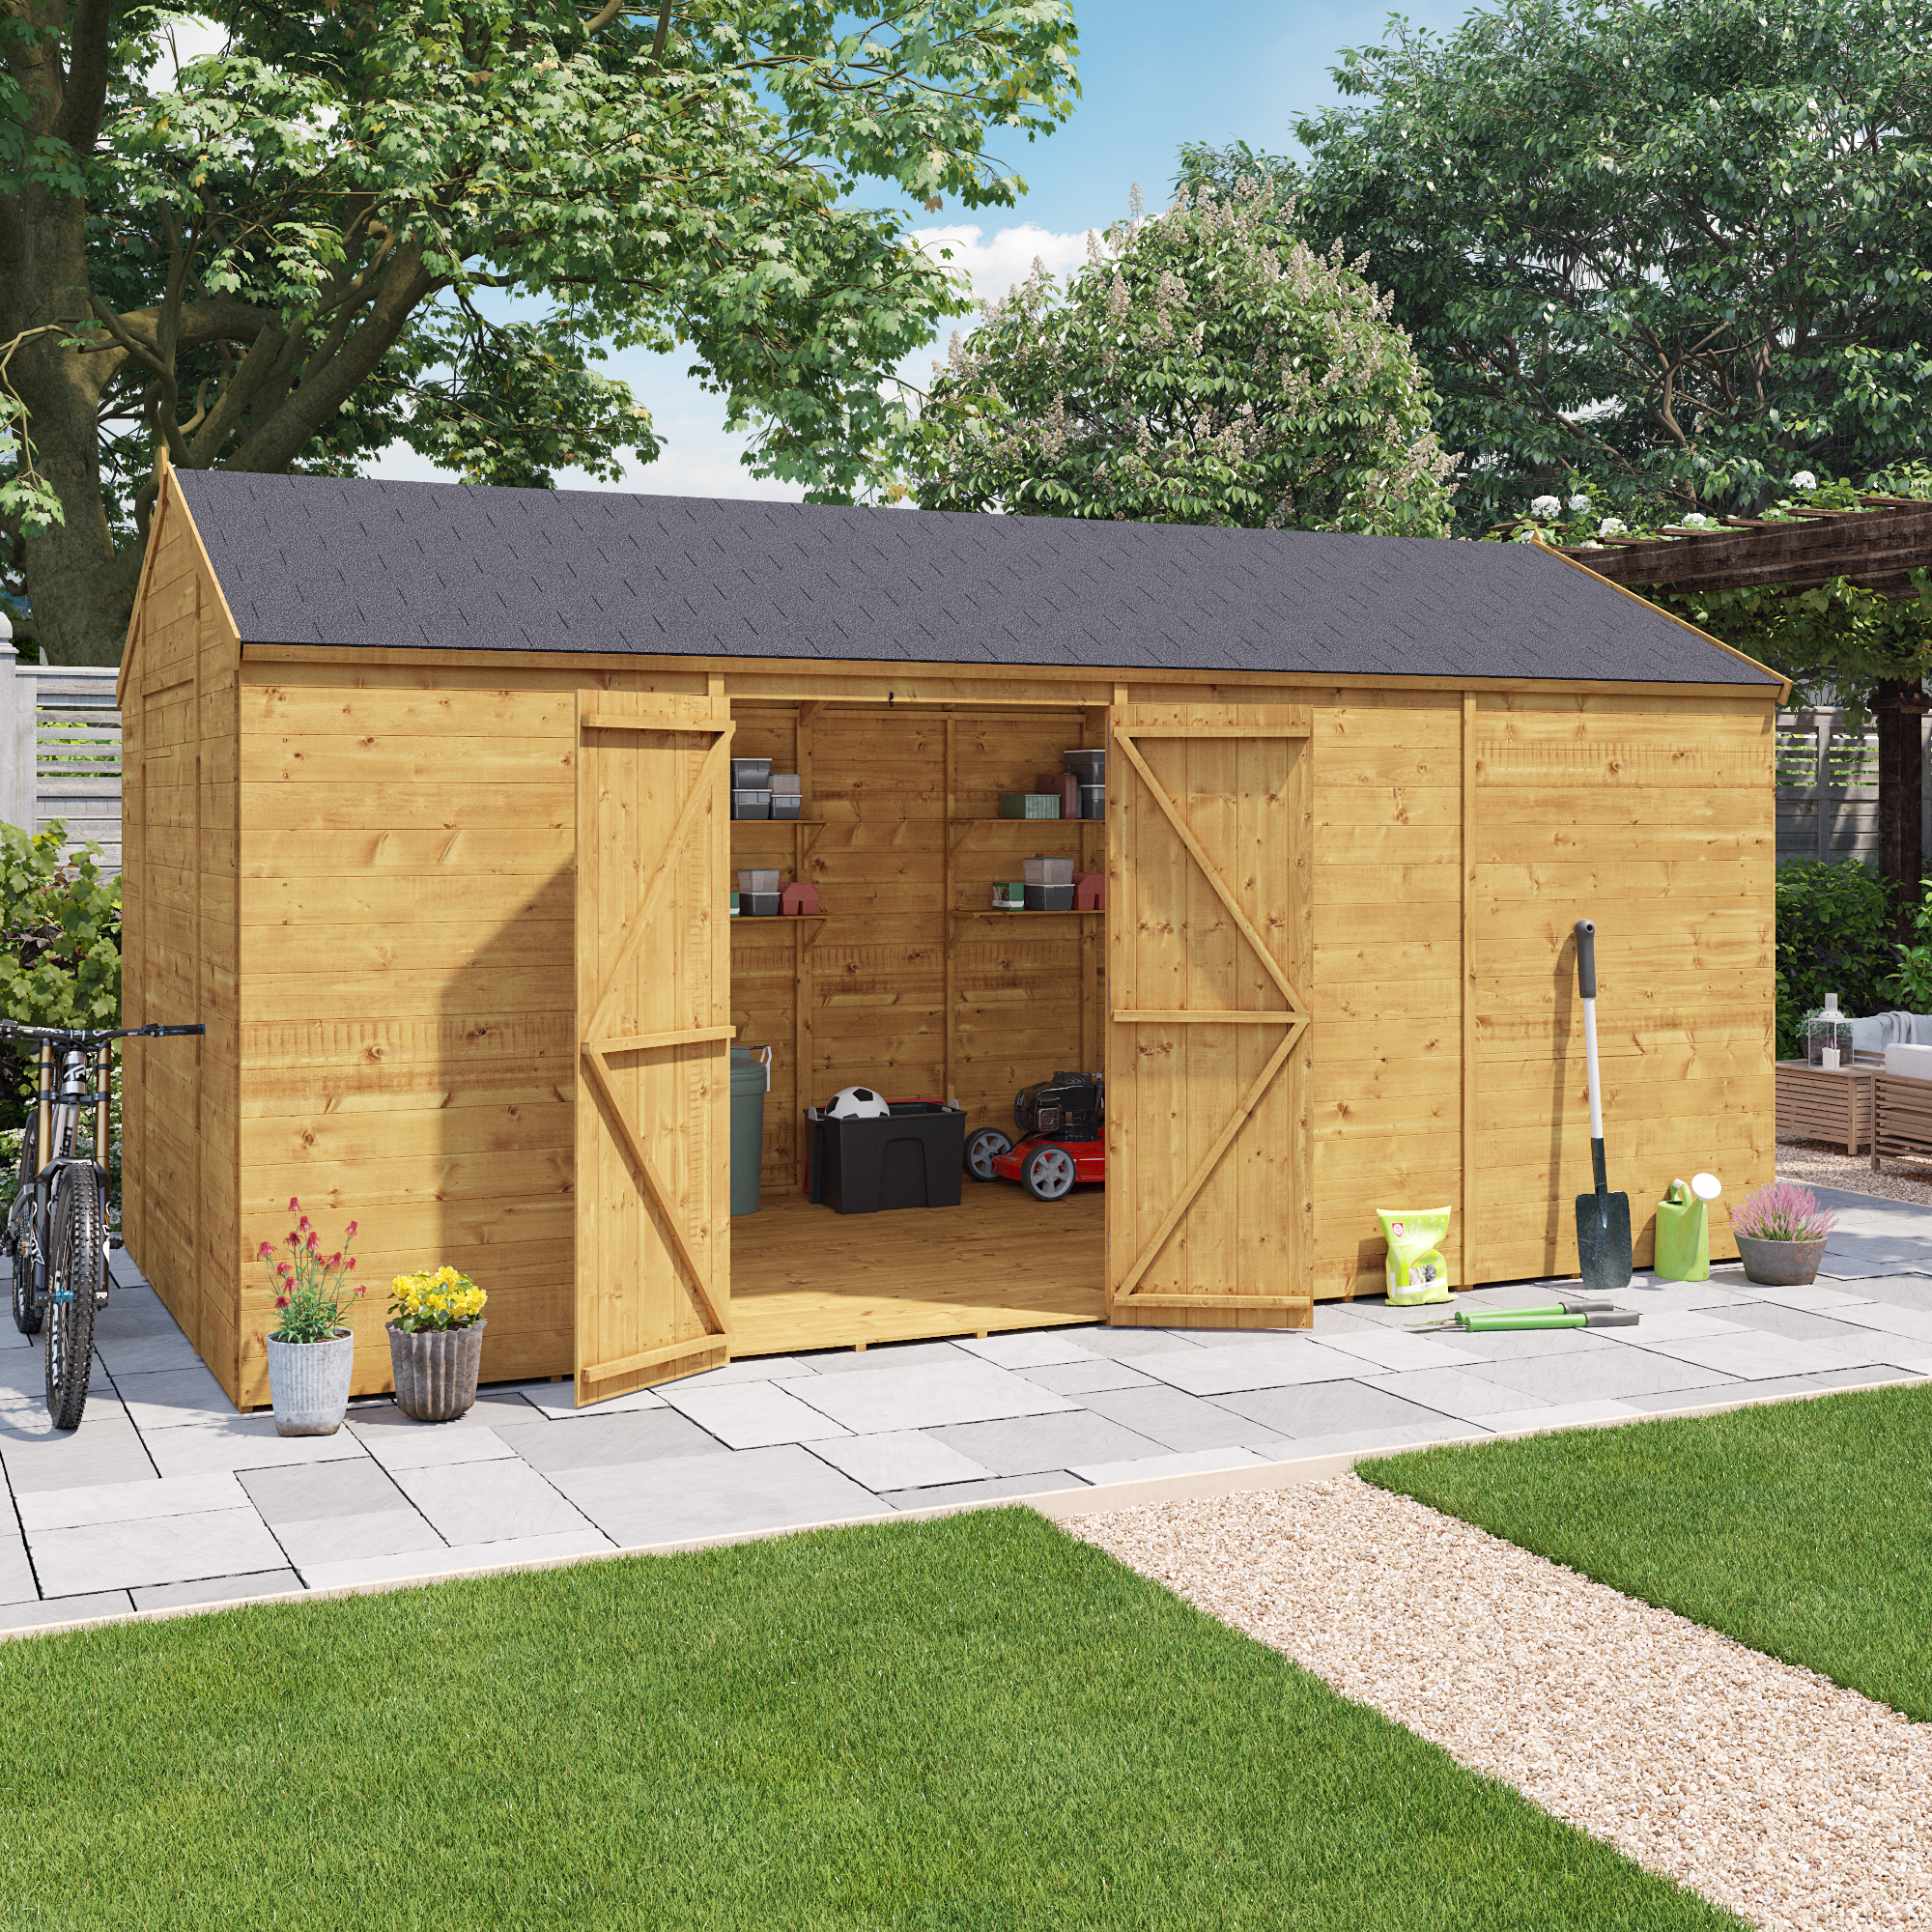 Image of 12 x 10 Pressure Treated Shed - BillyOh Expert Reverse Workshop Garden Shed - Windowless